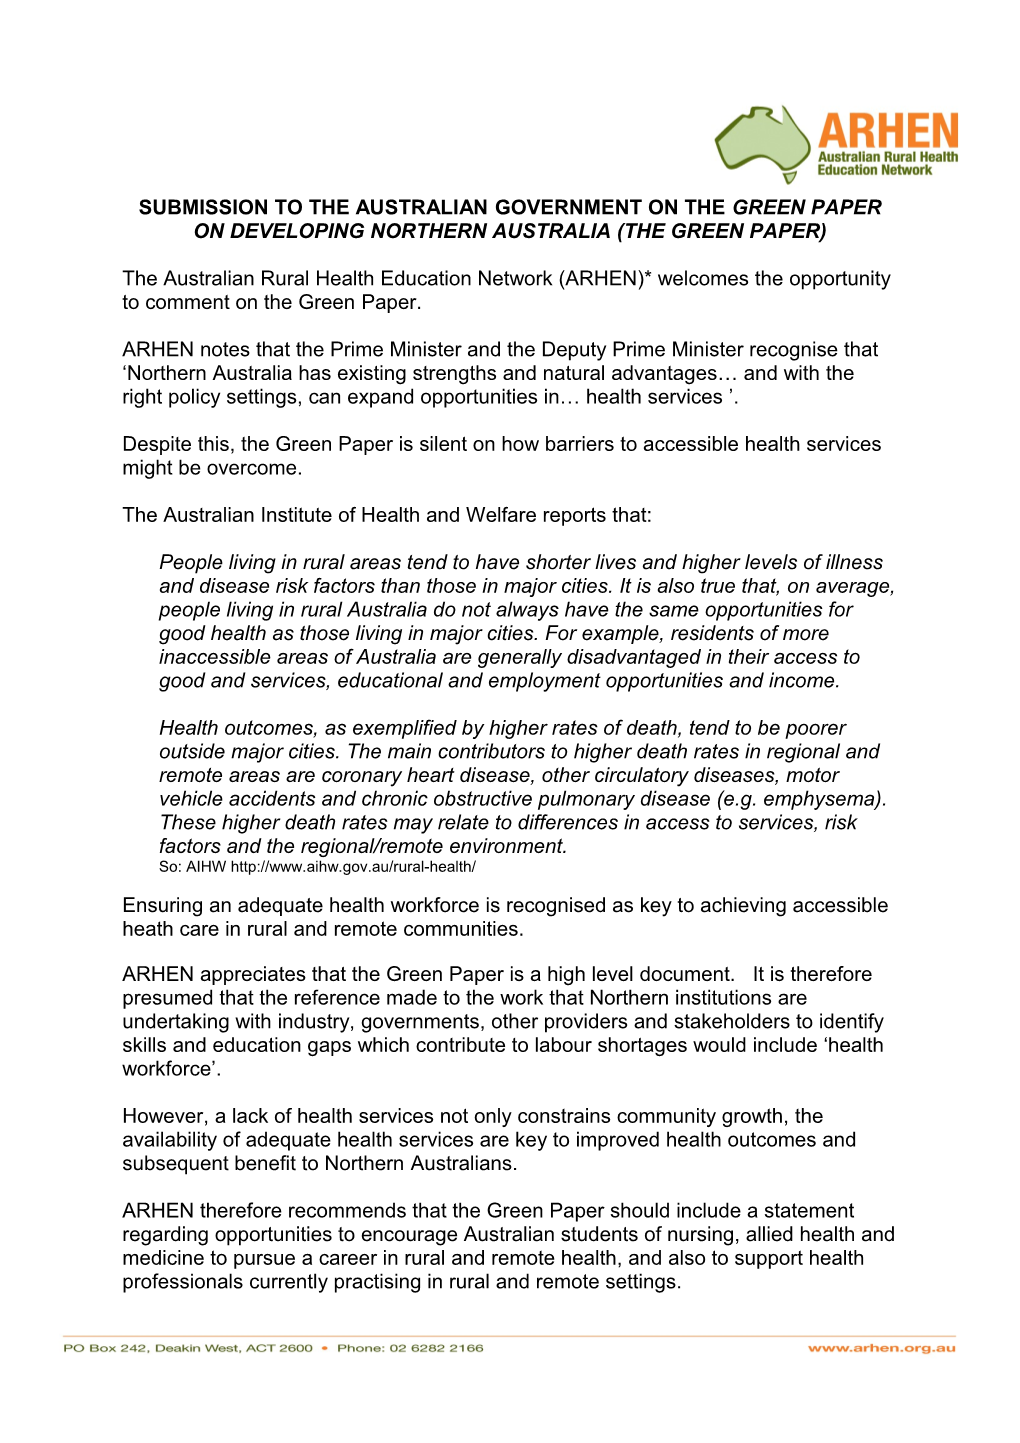 Submission to the Australian Government on the Green Paper on Developing Northern Australia